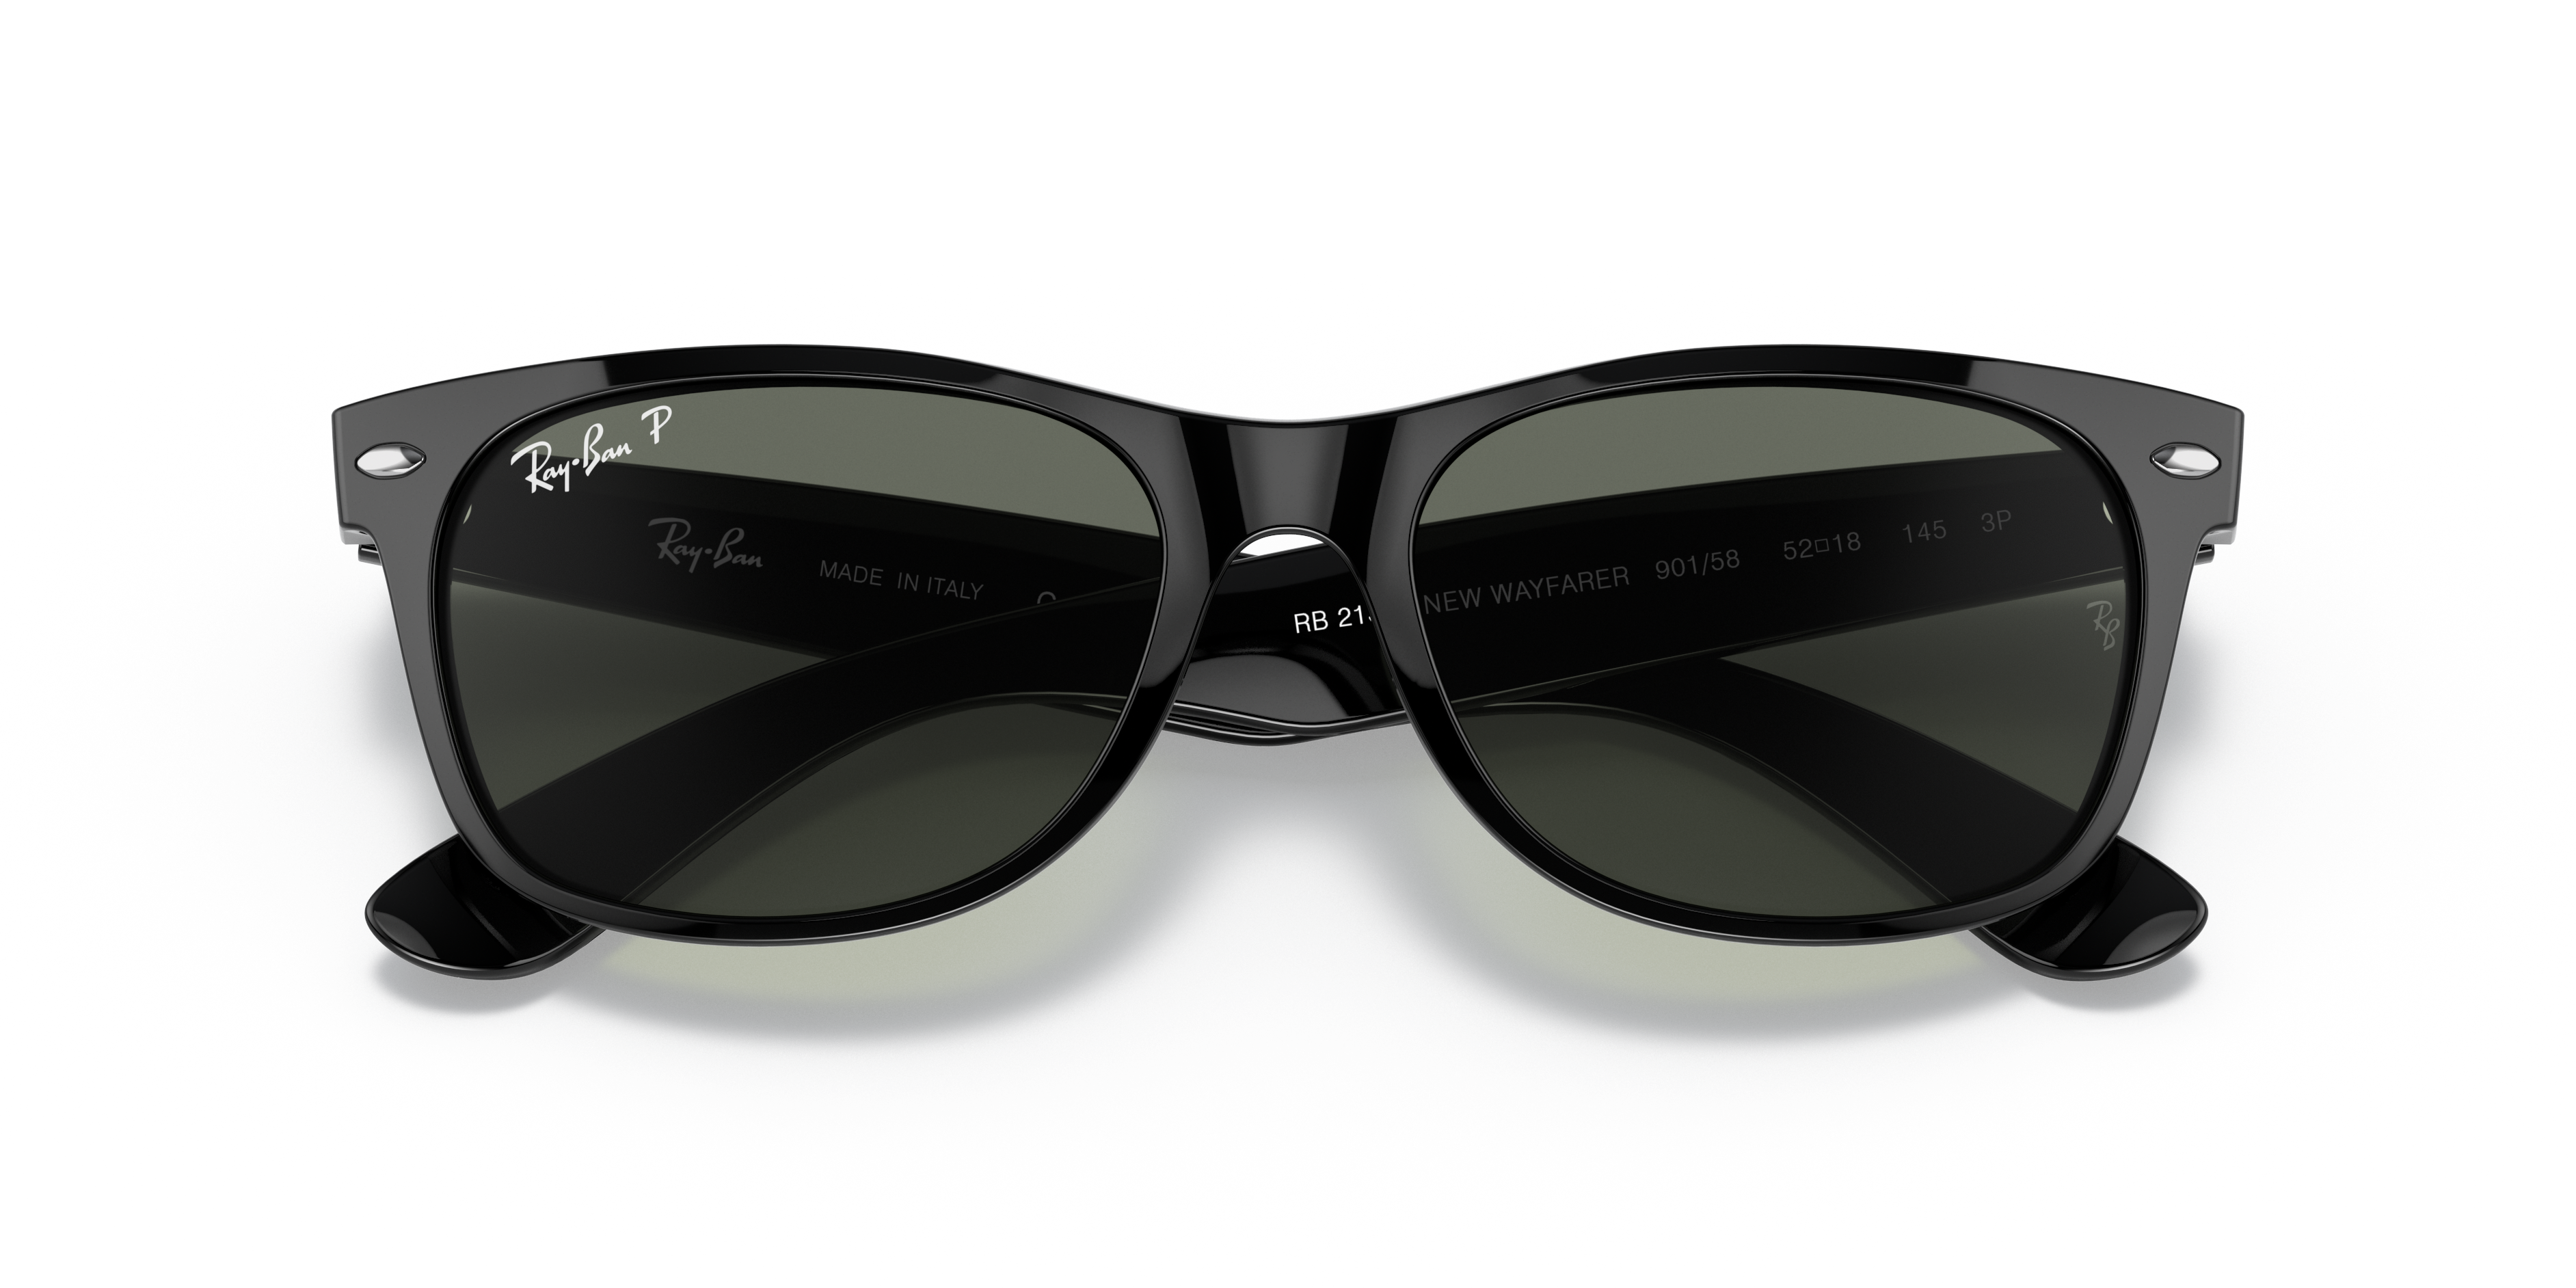 New Wayfarer Classic Sunglasses in Black On Gold and Green | Ray-Ban®